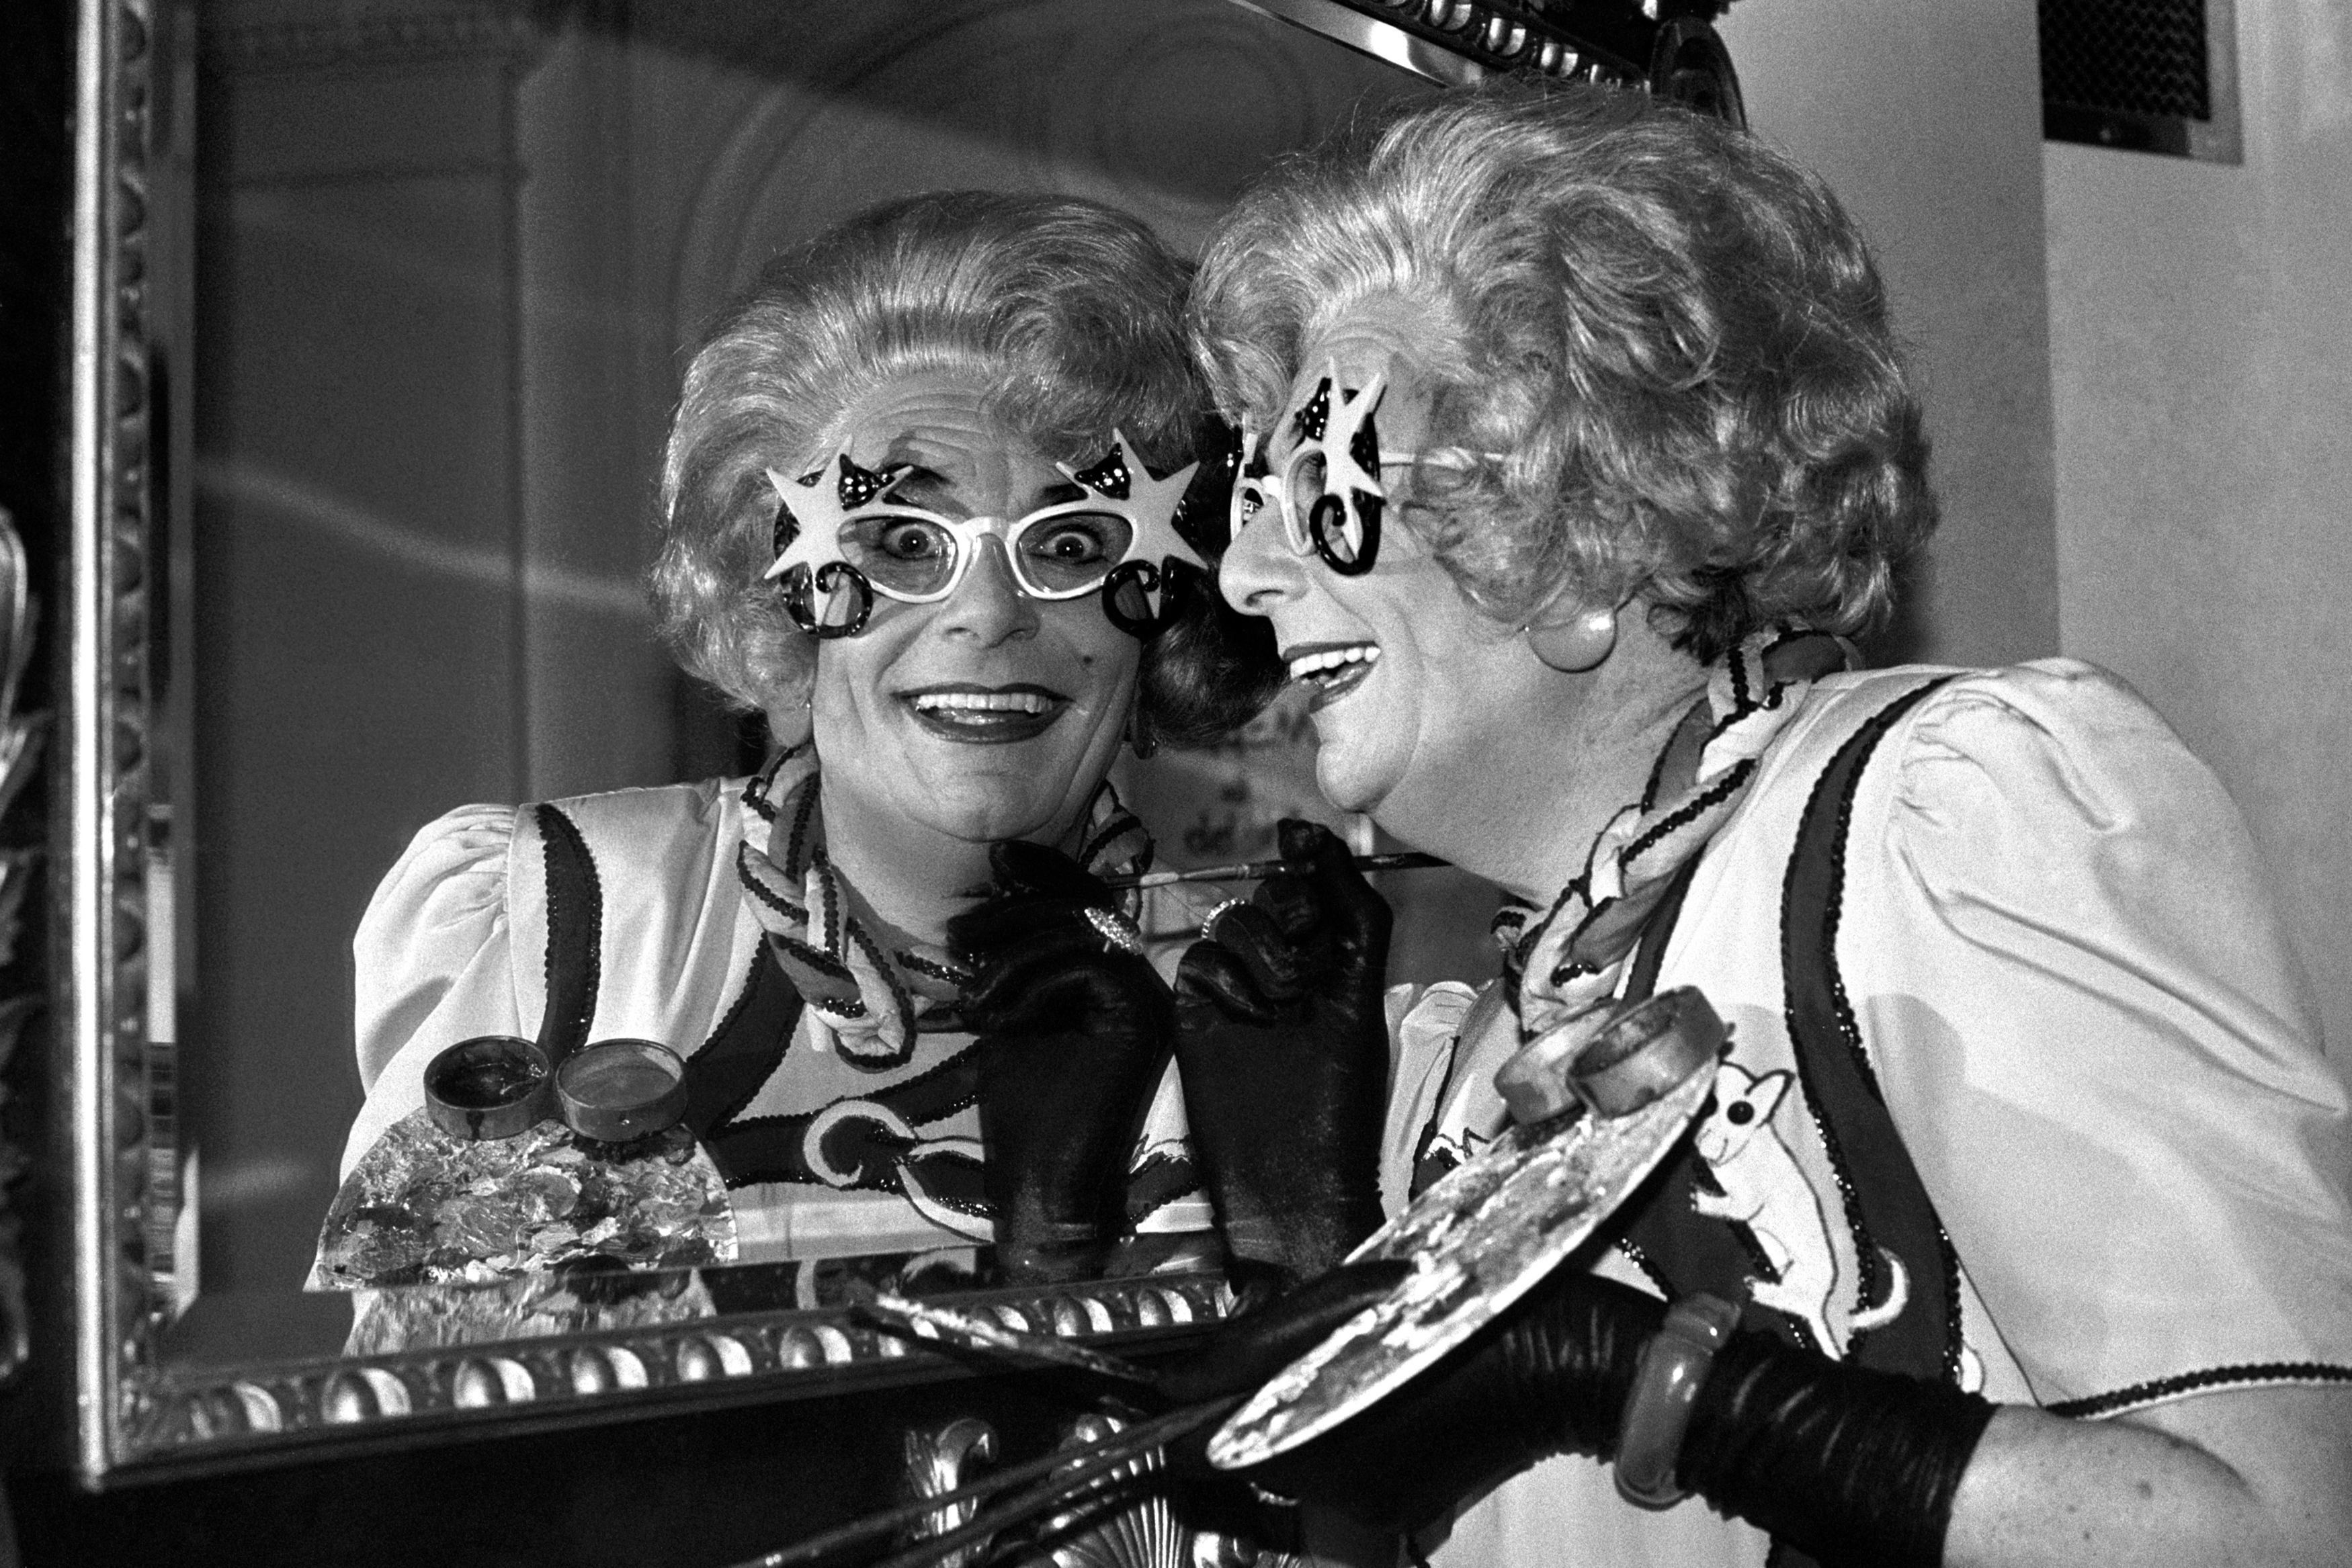 Humphries checking Dame Edna’s make-up at the Park Lane Hotel in Piccadilly, 1988